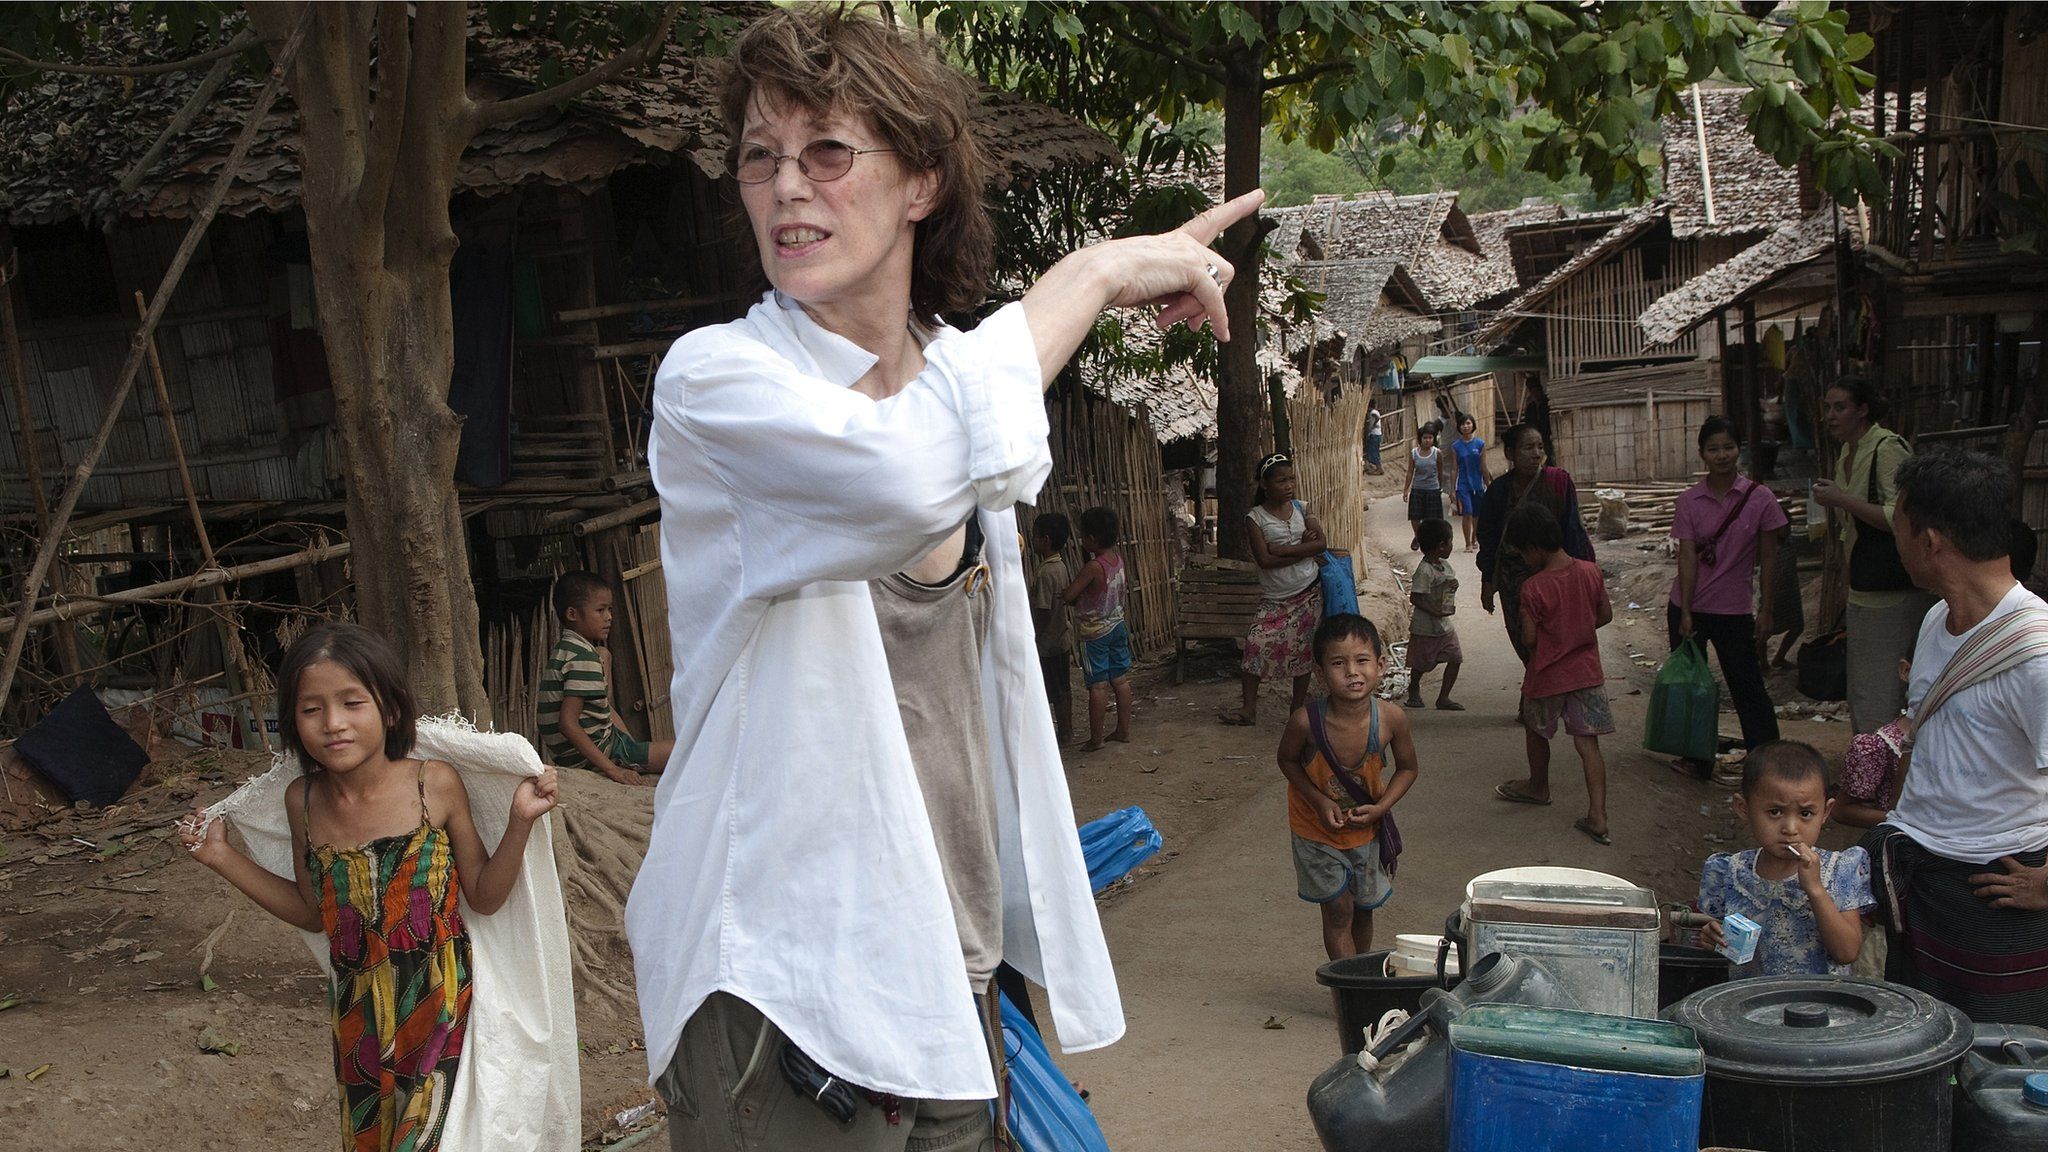 Jane Birkin during a visit to a refugee camp in Myanmar in 2010. She was a longtime pro-democracy activist